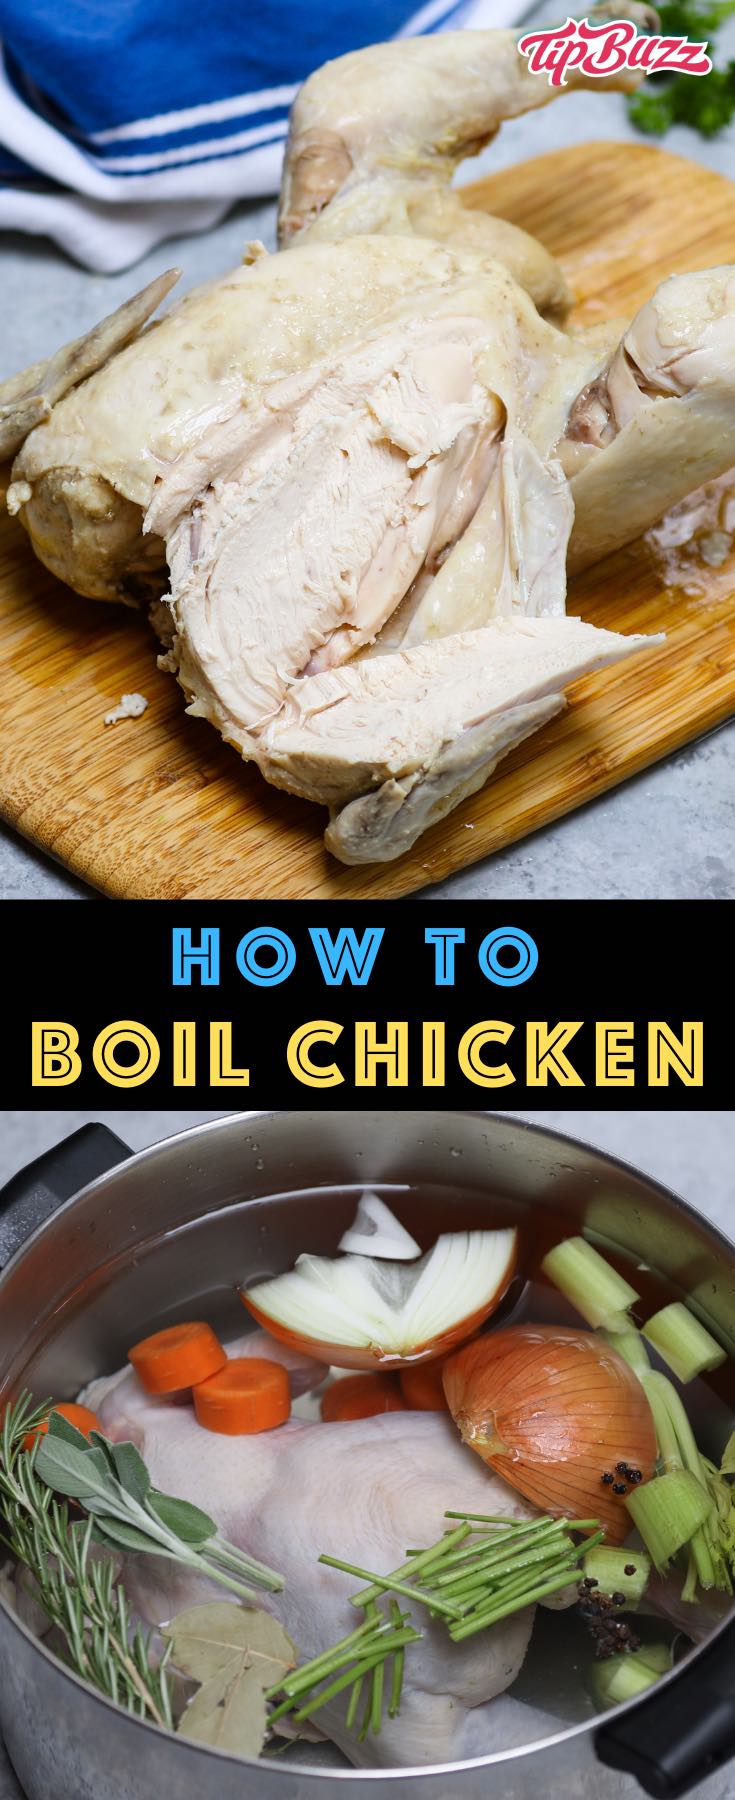 Learn how to boil chicken with tips for cooking chicken breasts, whole chicken, thighs, wings or legs including boiling times for both fresh and frozen. It's delicious and easy to make! #boiledchicken @boilingchicken #boilchicken